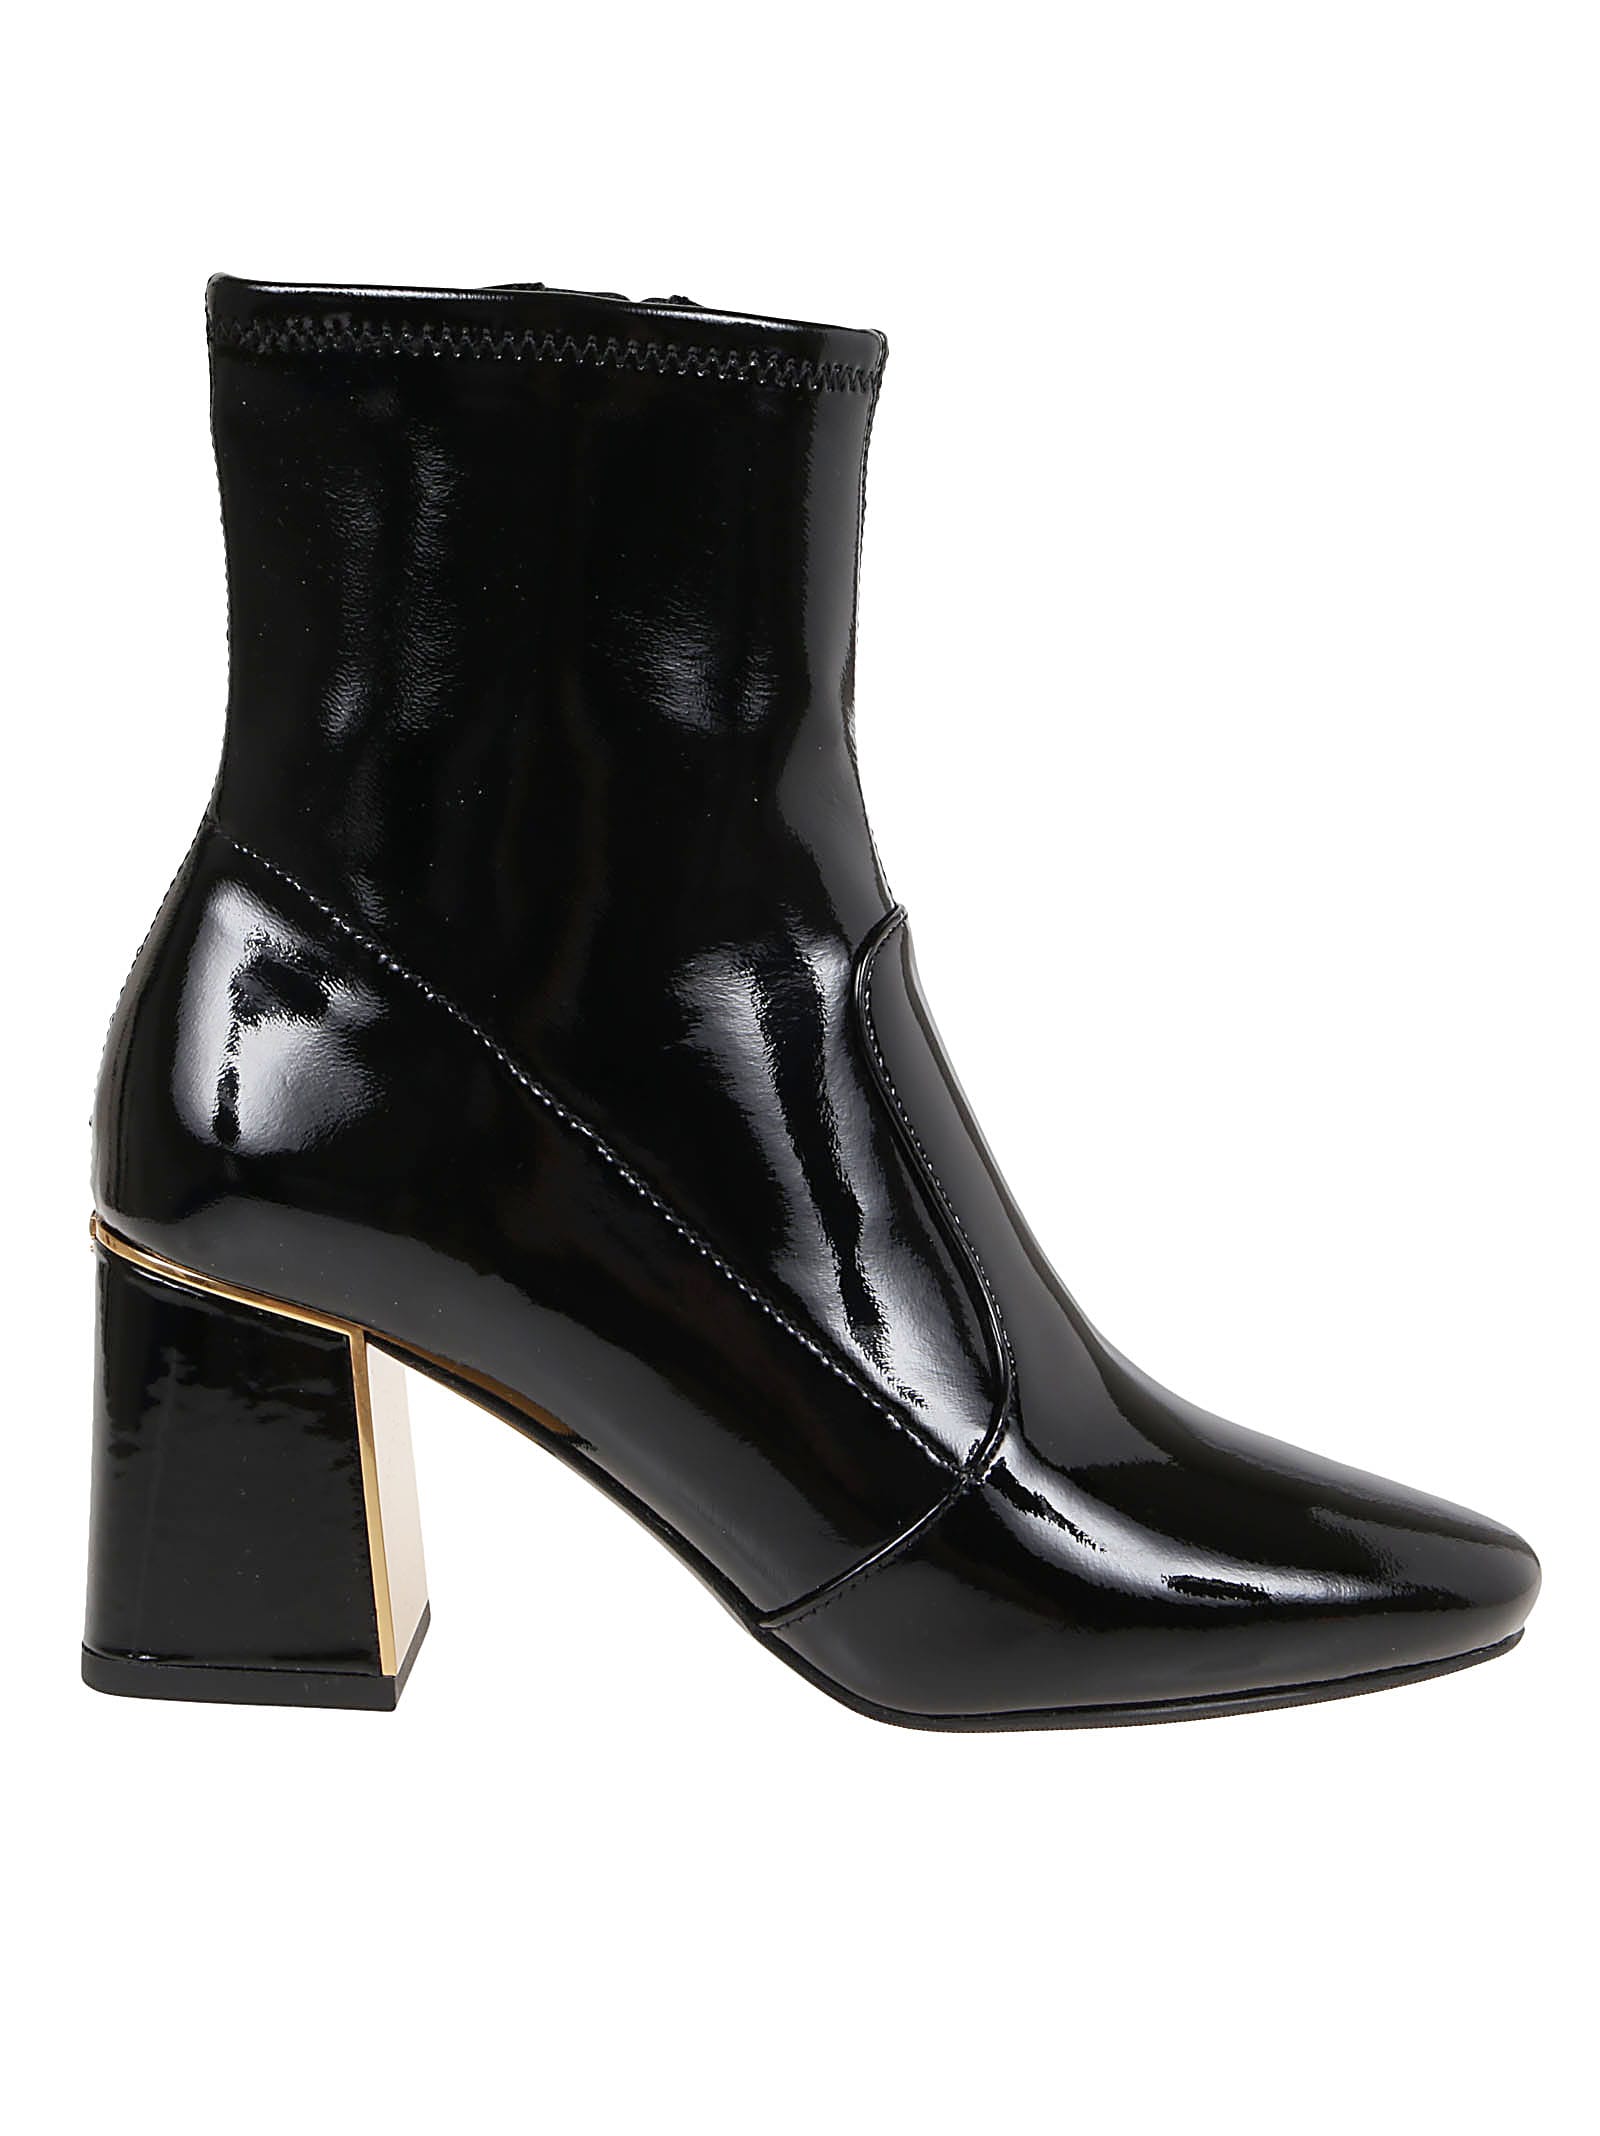 Buy Tory Burch Gigi Stretch Ankle Boot 70mm online, shop Tory Burch shoes with free shipping